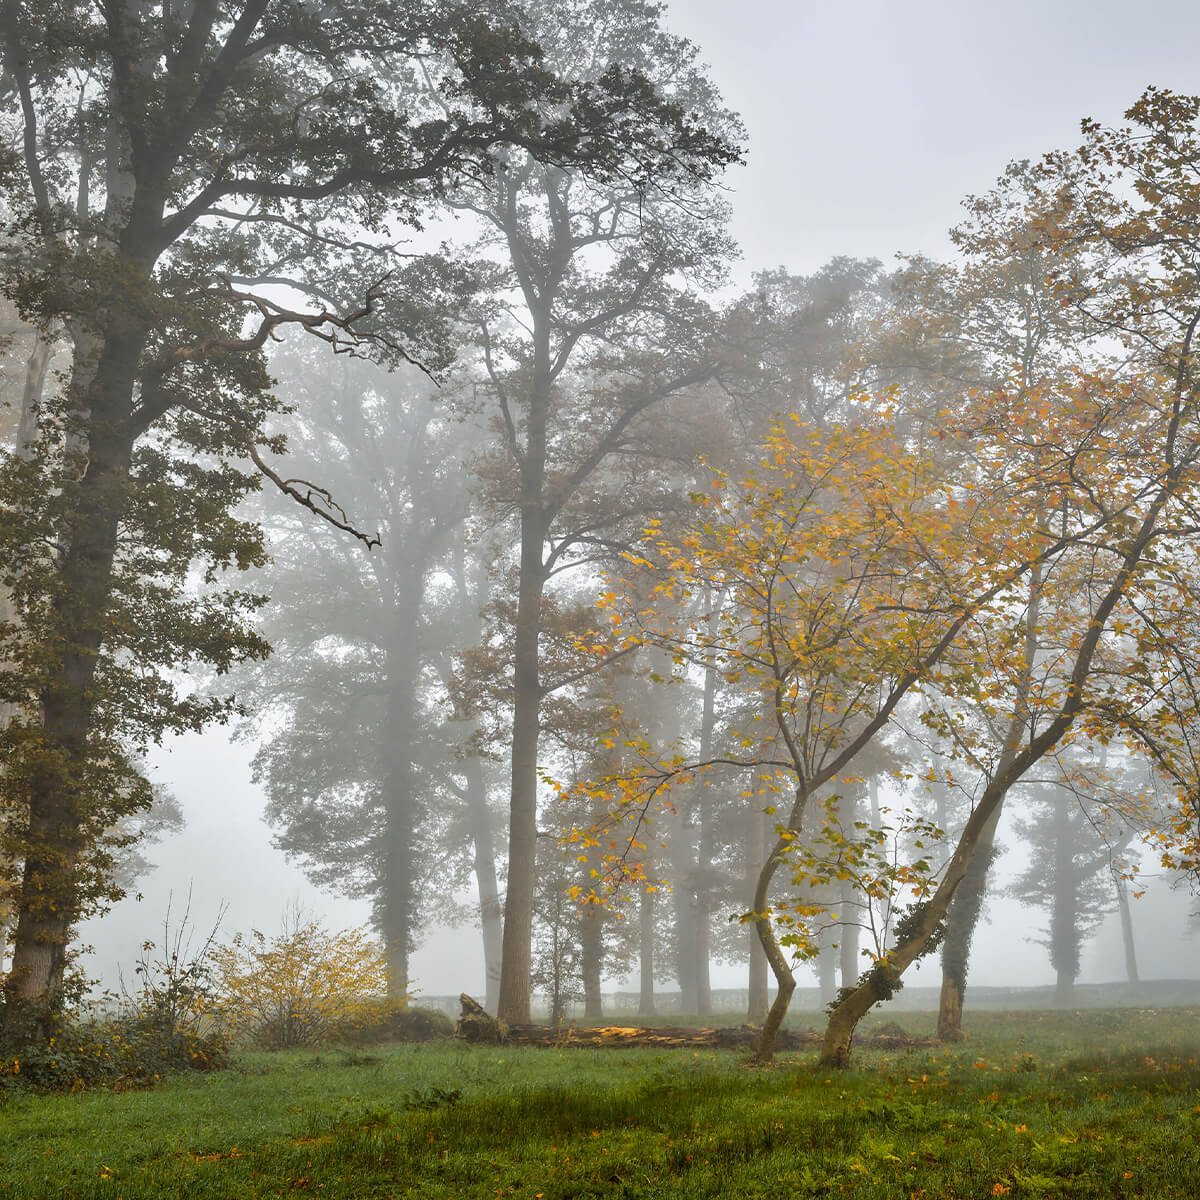 Grass field with trees and fog